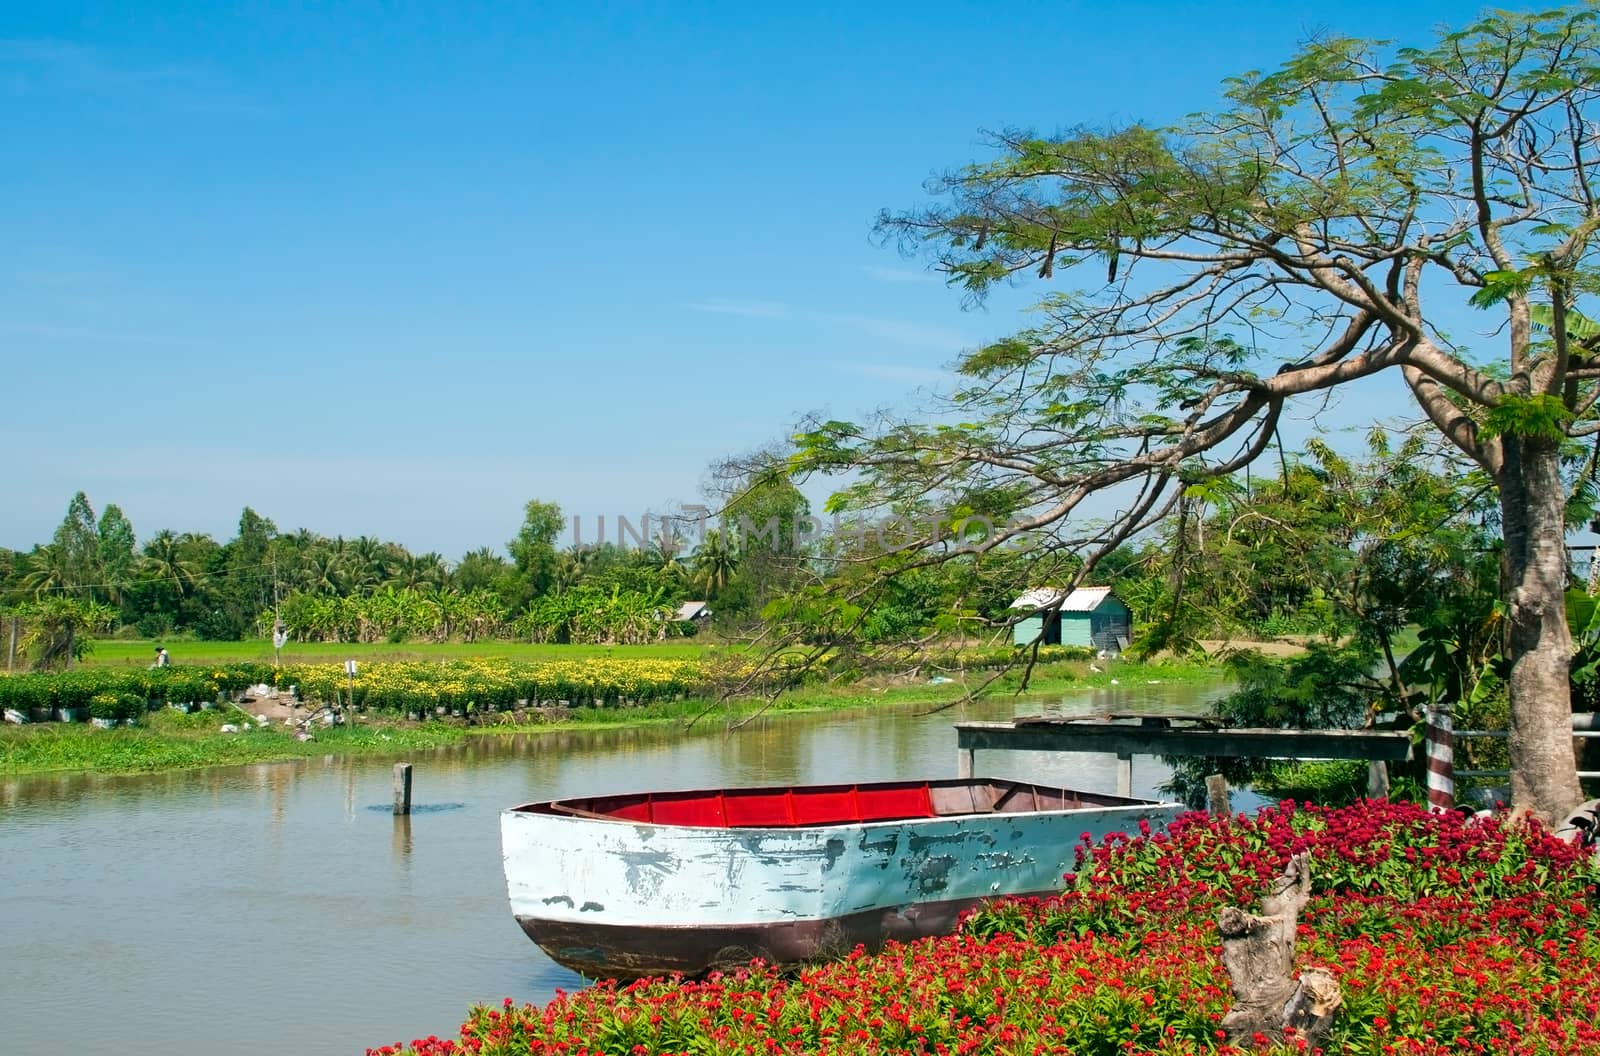 Beautiful landscape ofcountryside with colorful boat on water,  flower blossom in red under blue sky